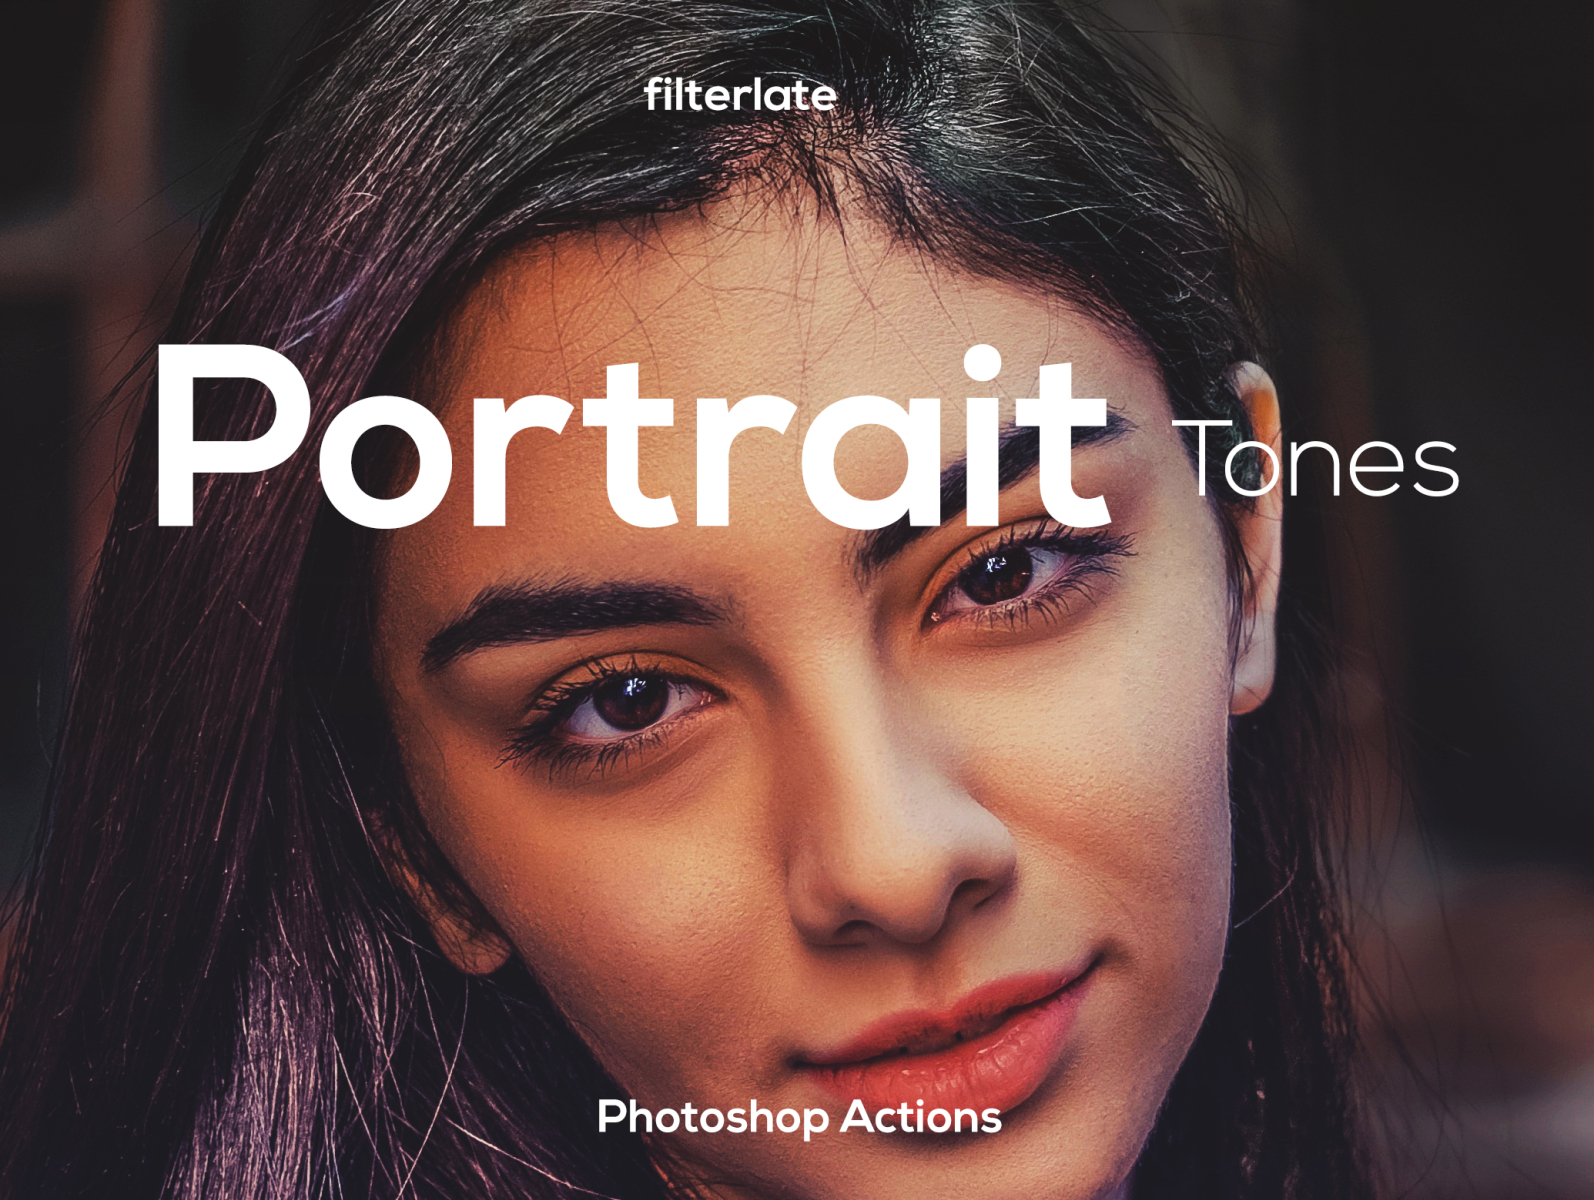 Portrait Tones actions addons creative dribbble filterlate filters graphic graphic design graphicriver instagram photographer photography photos photoshop photoshop action portrait tones webdesign women womens